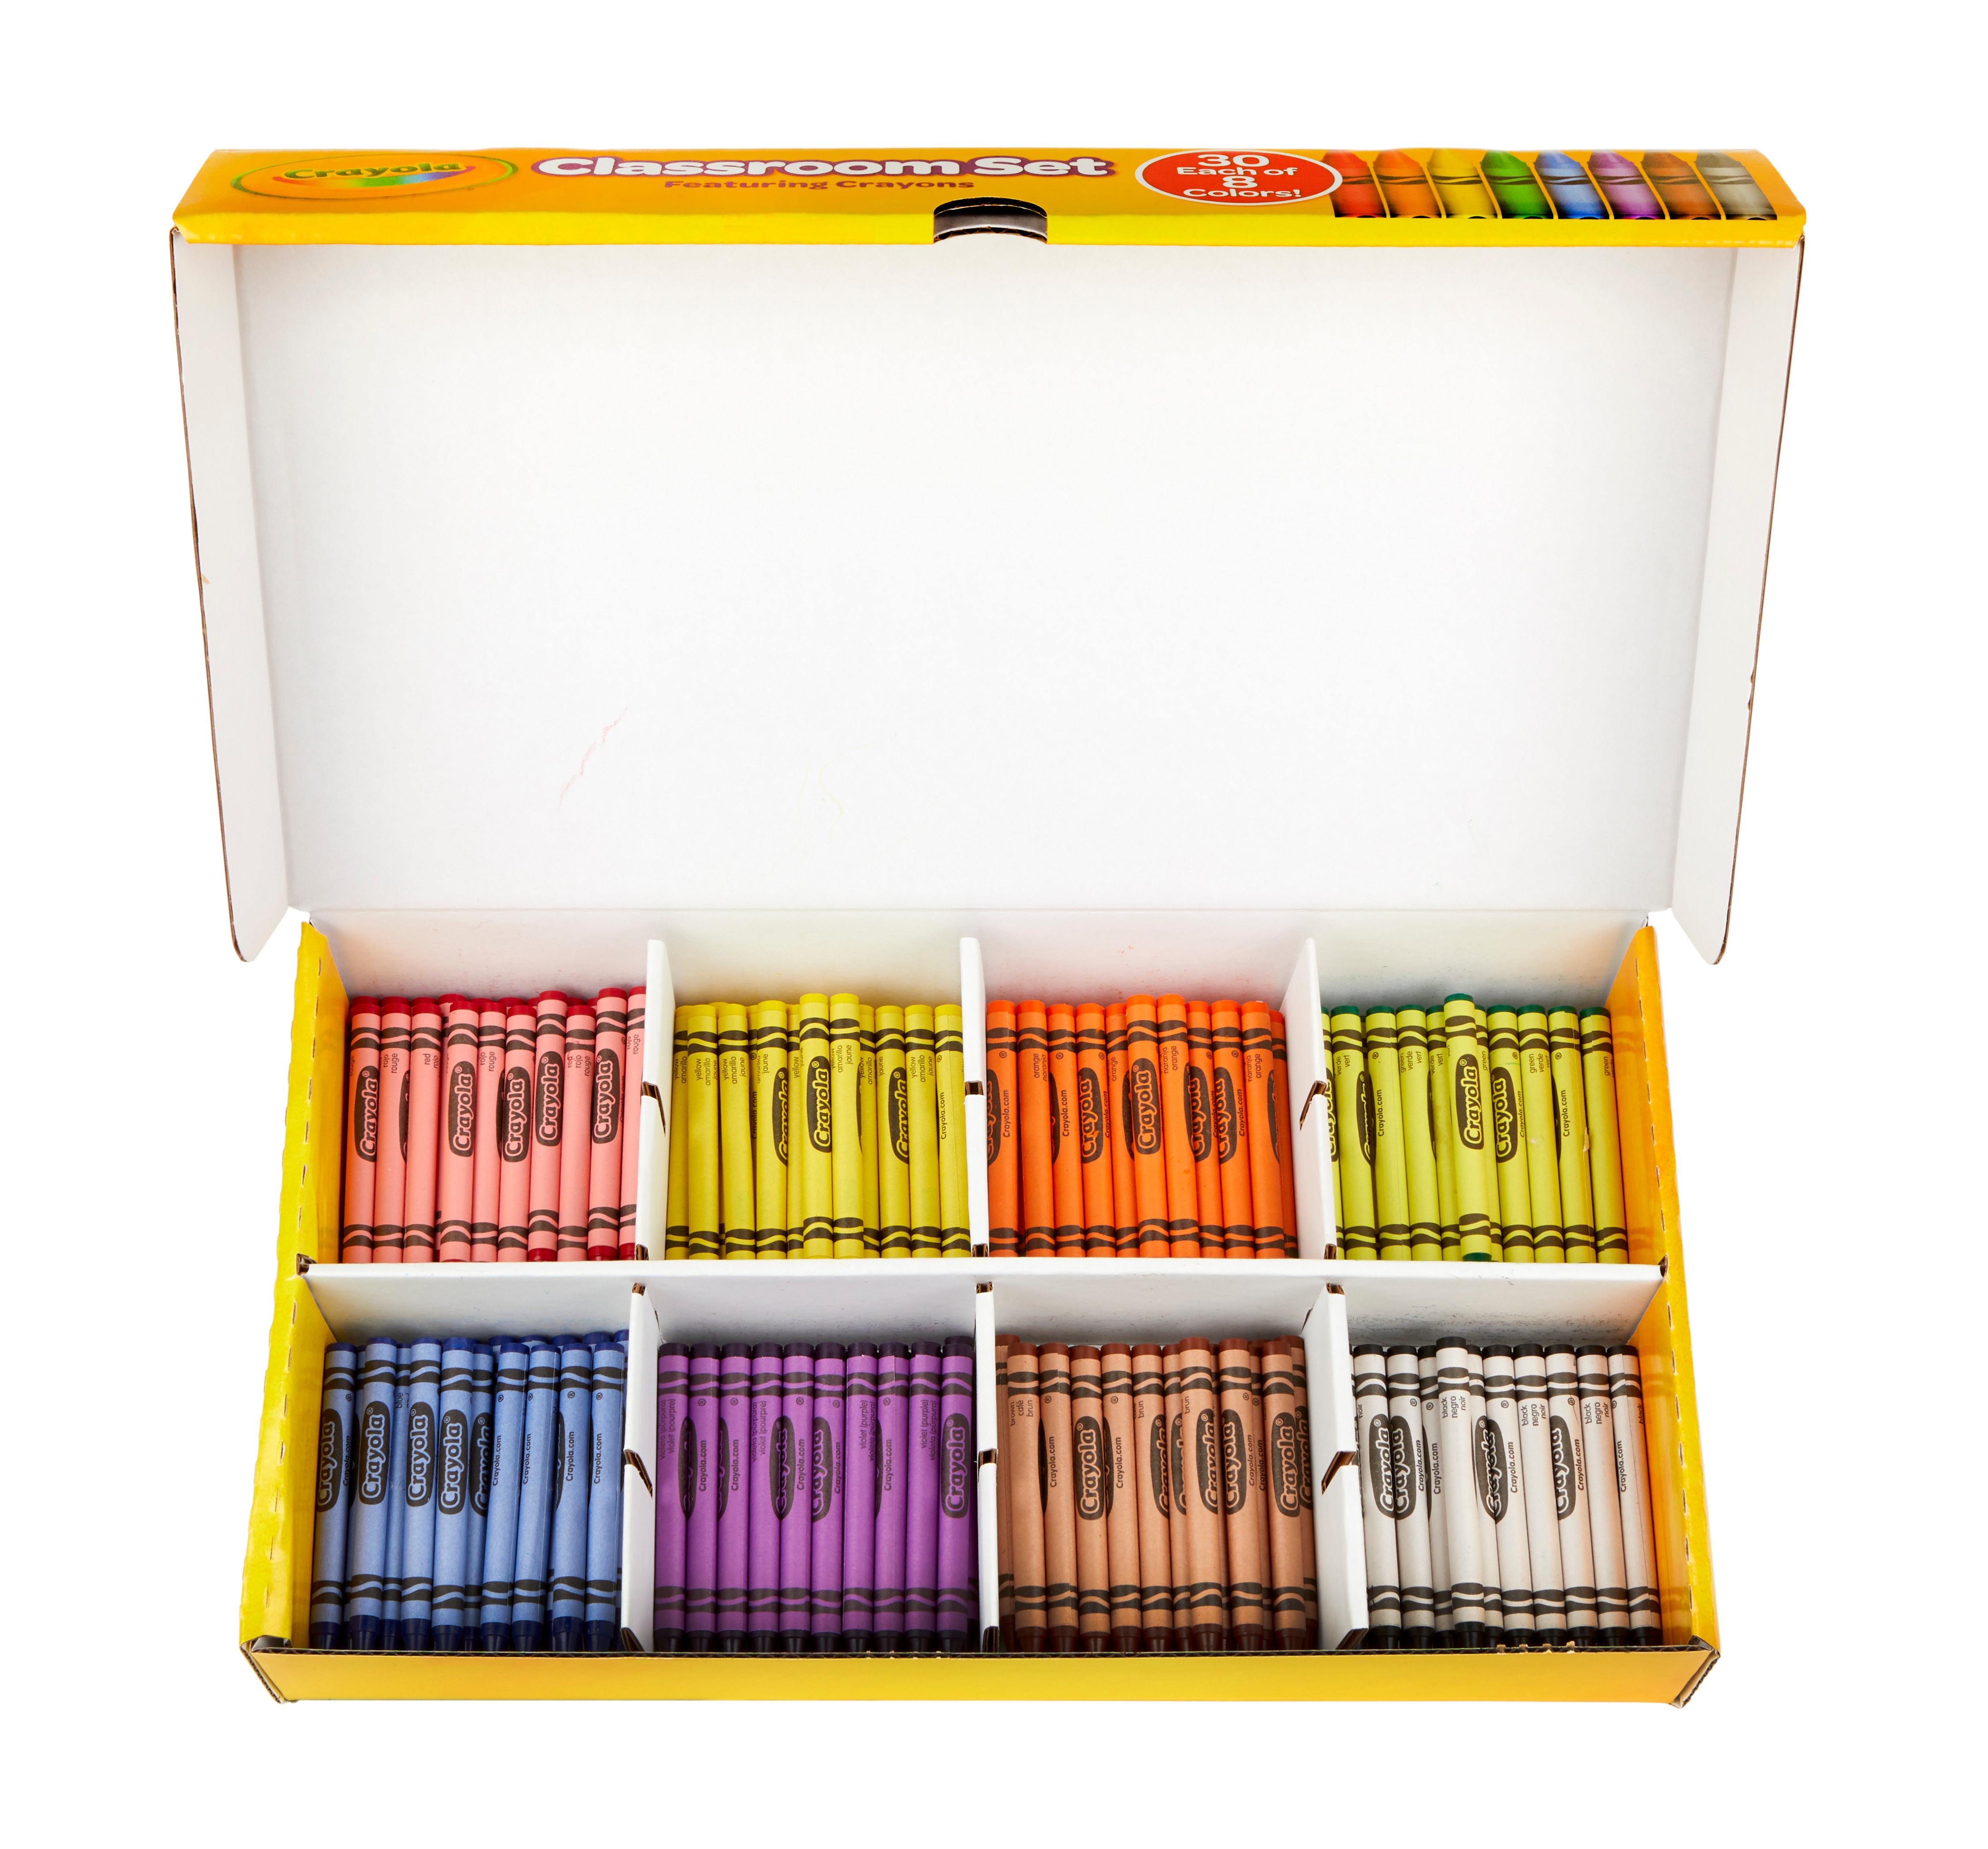 Crayola Classroom Set Crayons, 240 Ct, Teacher Supplies & Gifts, Classroom Supplies, Assorted Colors - image 4 of 9